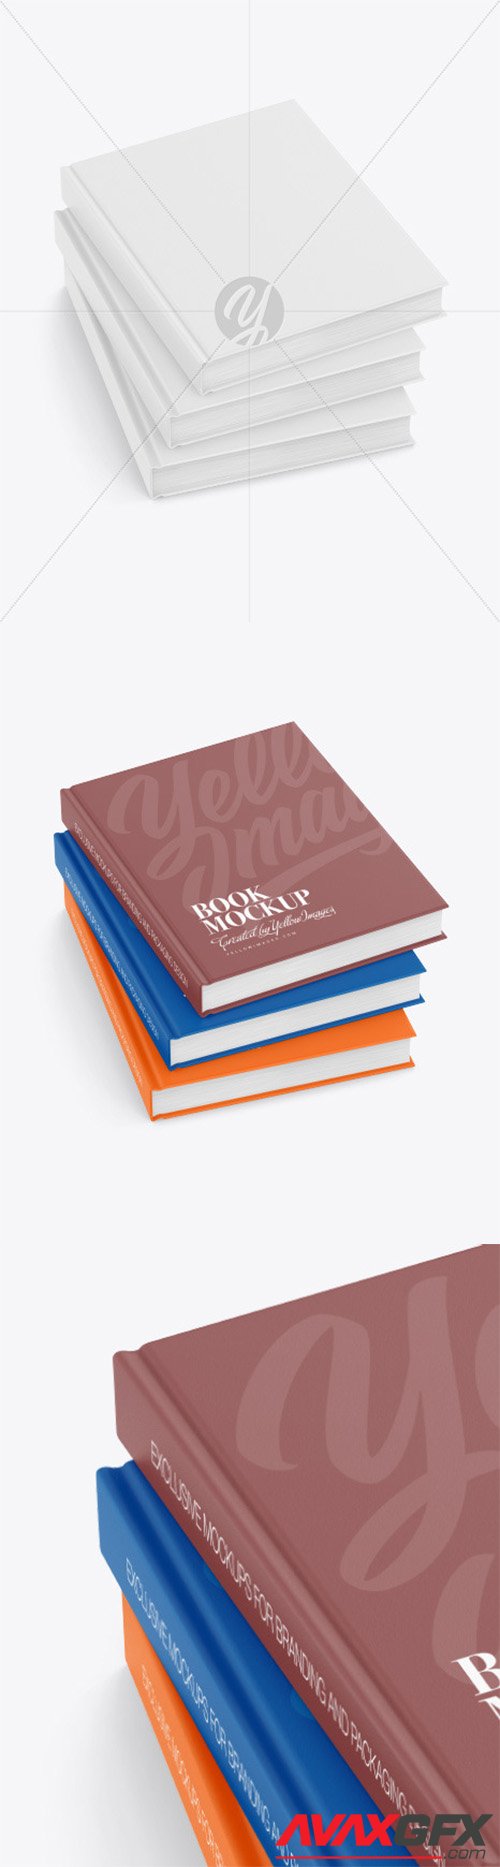 Hardcover Books w/ Textured Cover Mockup 65106